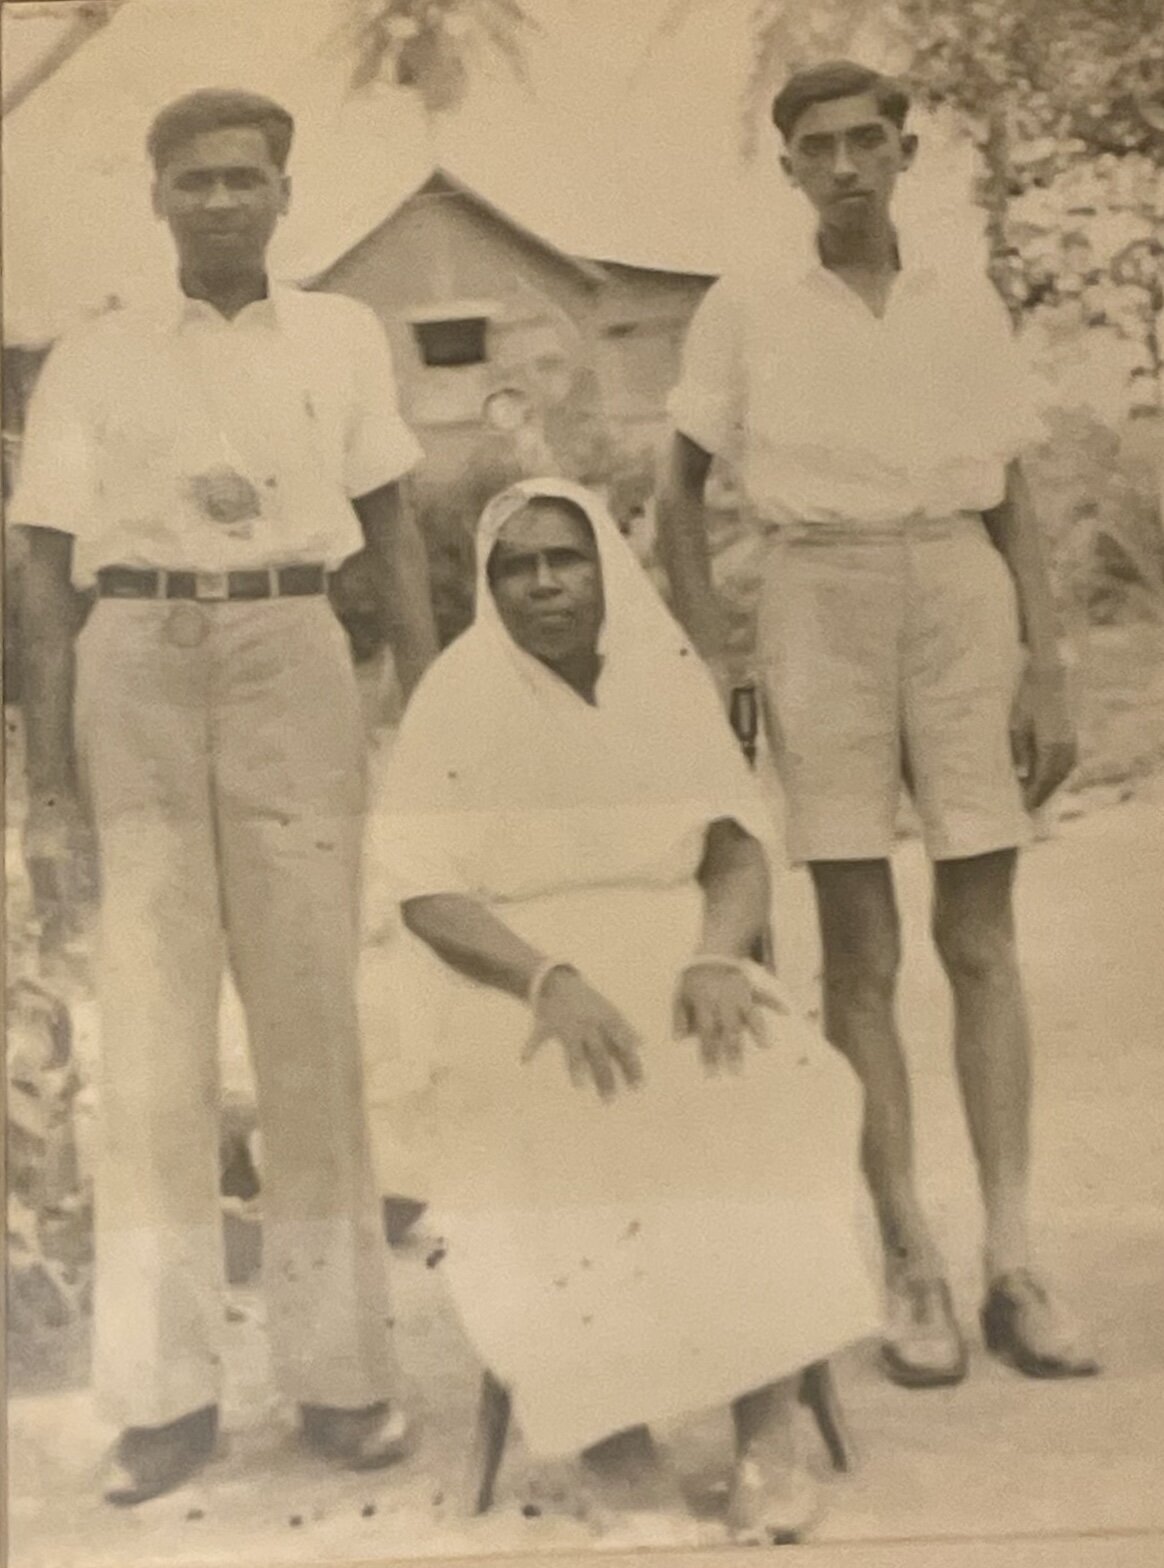 My father (right) as a teenager in Trinidad